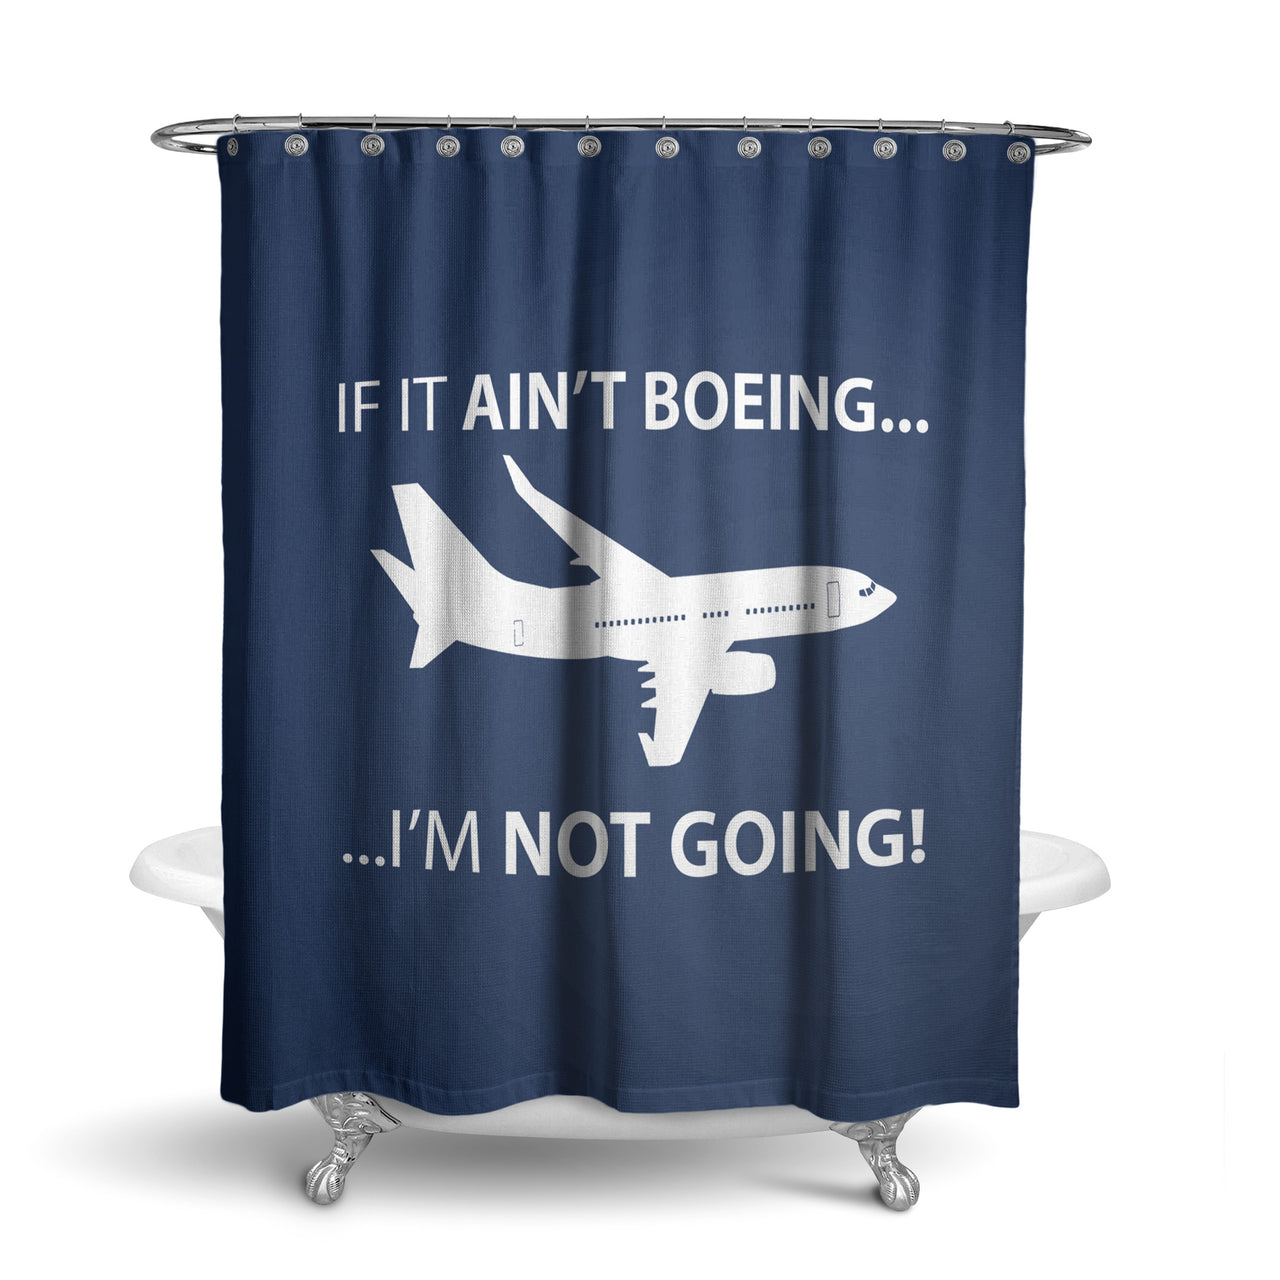 If It Ain't Boeing I'm Not Going! Designed Shower Curtains